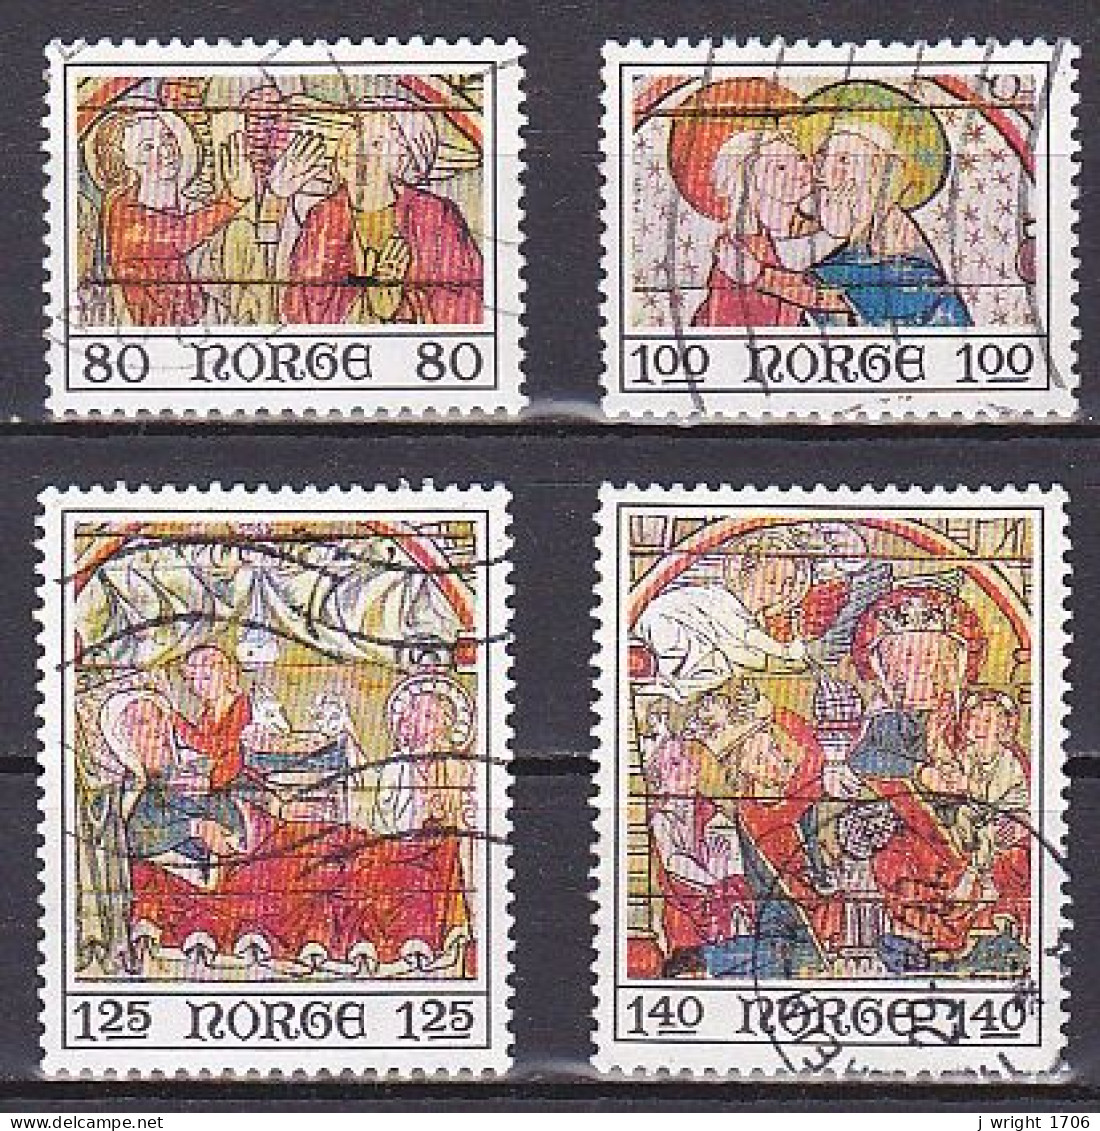 Norway, 1975, Ål Stave Church Paintings, Set, USED - Used Stamps